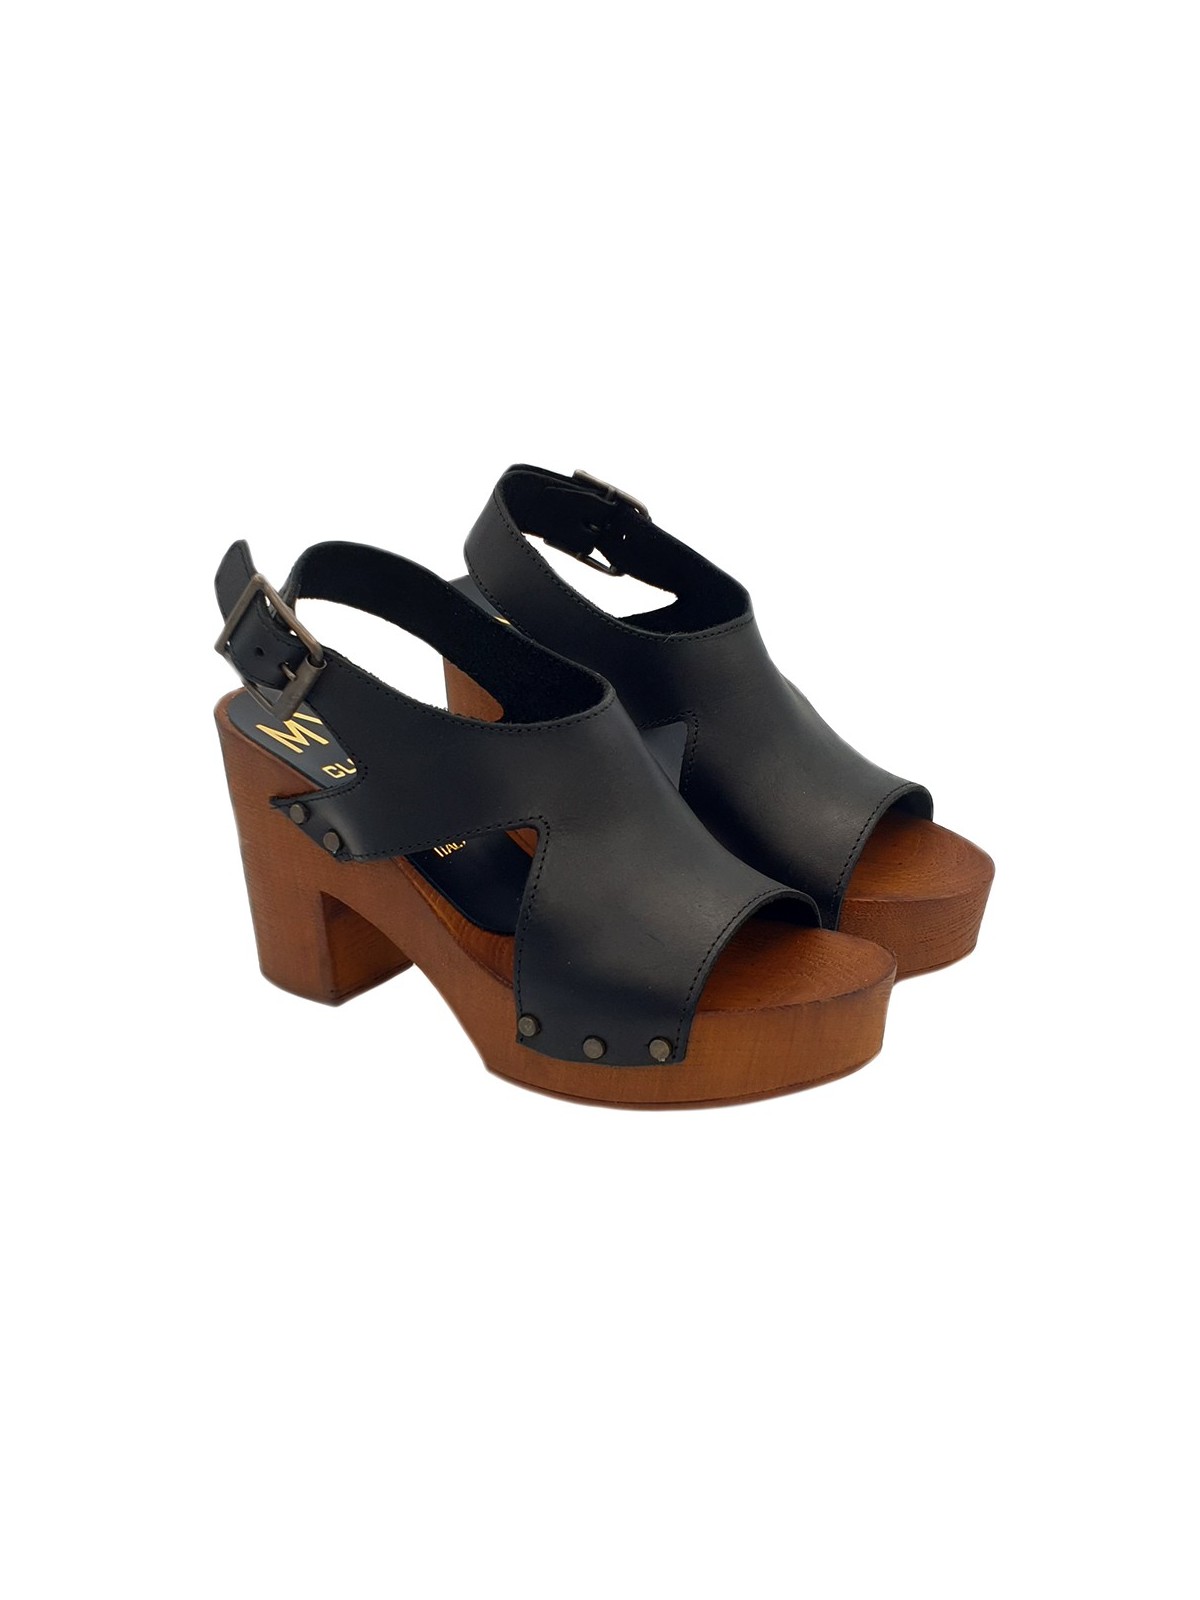 CLOGS BLACK IN LEATHER AND COMFY HEEL 9